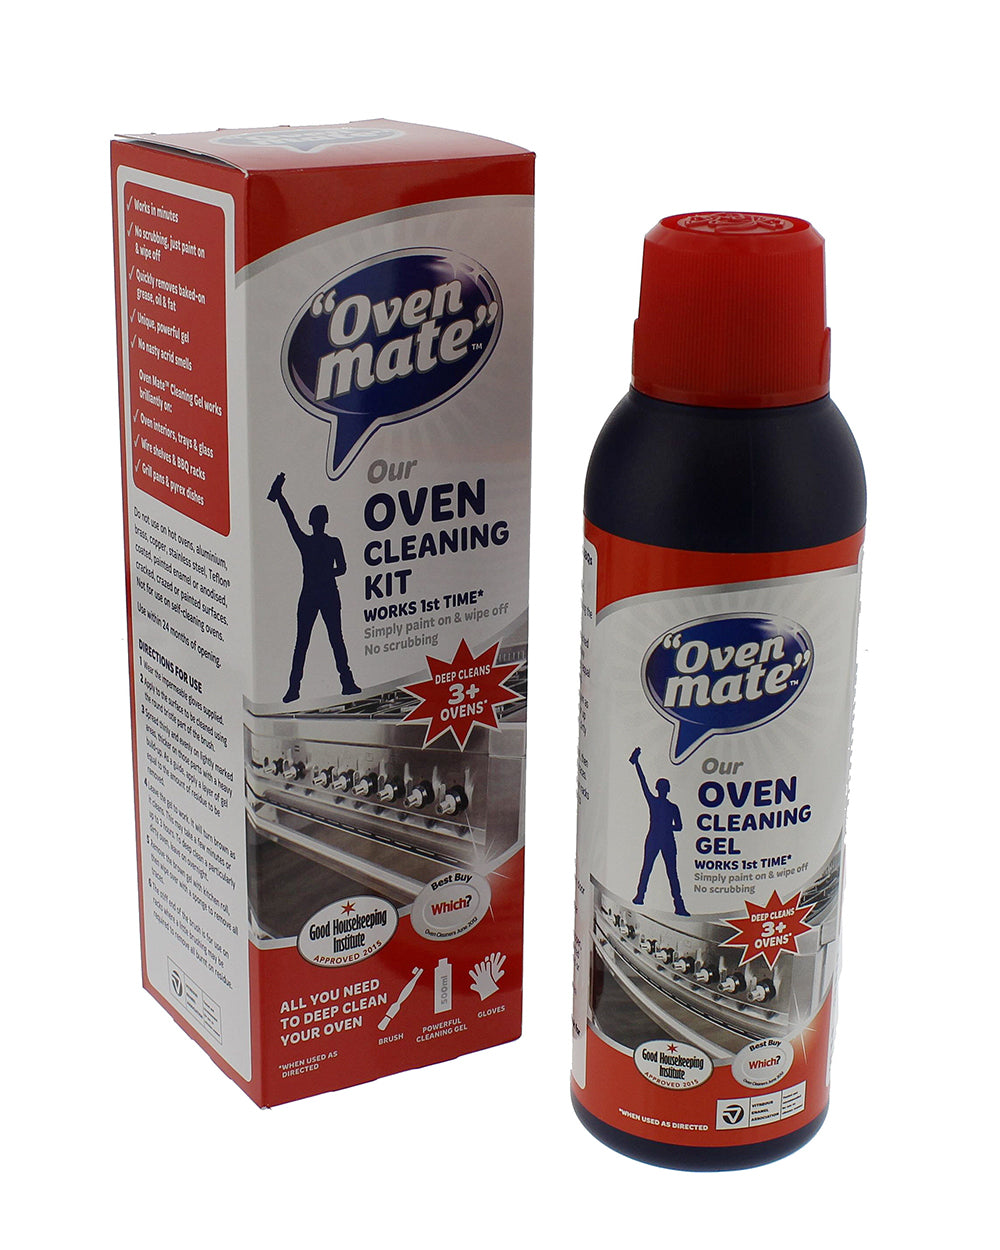 Oven Mate Oven Cleaning Gel 500ml Just For Racks Kit